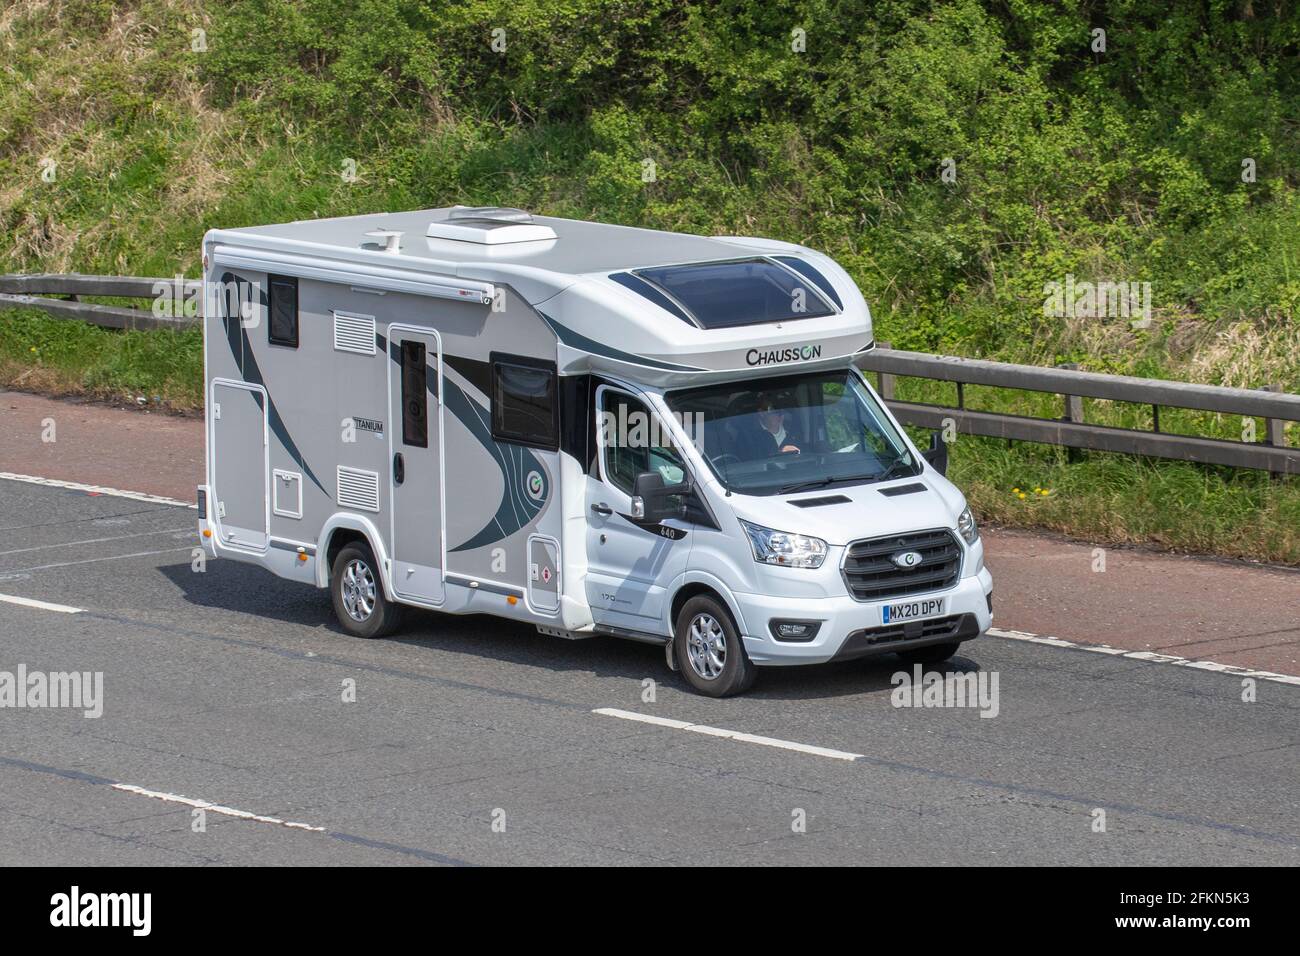 2020 Chausson, 170 automatic 640 Titanium; Caravans and Motorhomes,  campervans on Britain's roads, RV leisure vehicle, family holidays,  caravanette vacations, Touring caravan holiday, van conversions, Vanagon  autohome, life on the road Stock Photo - Alamy